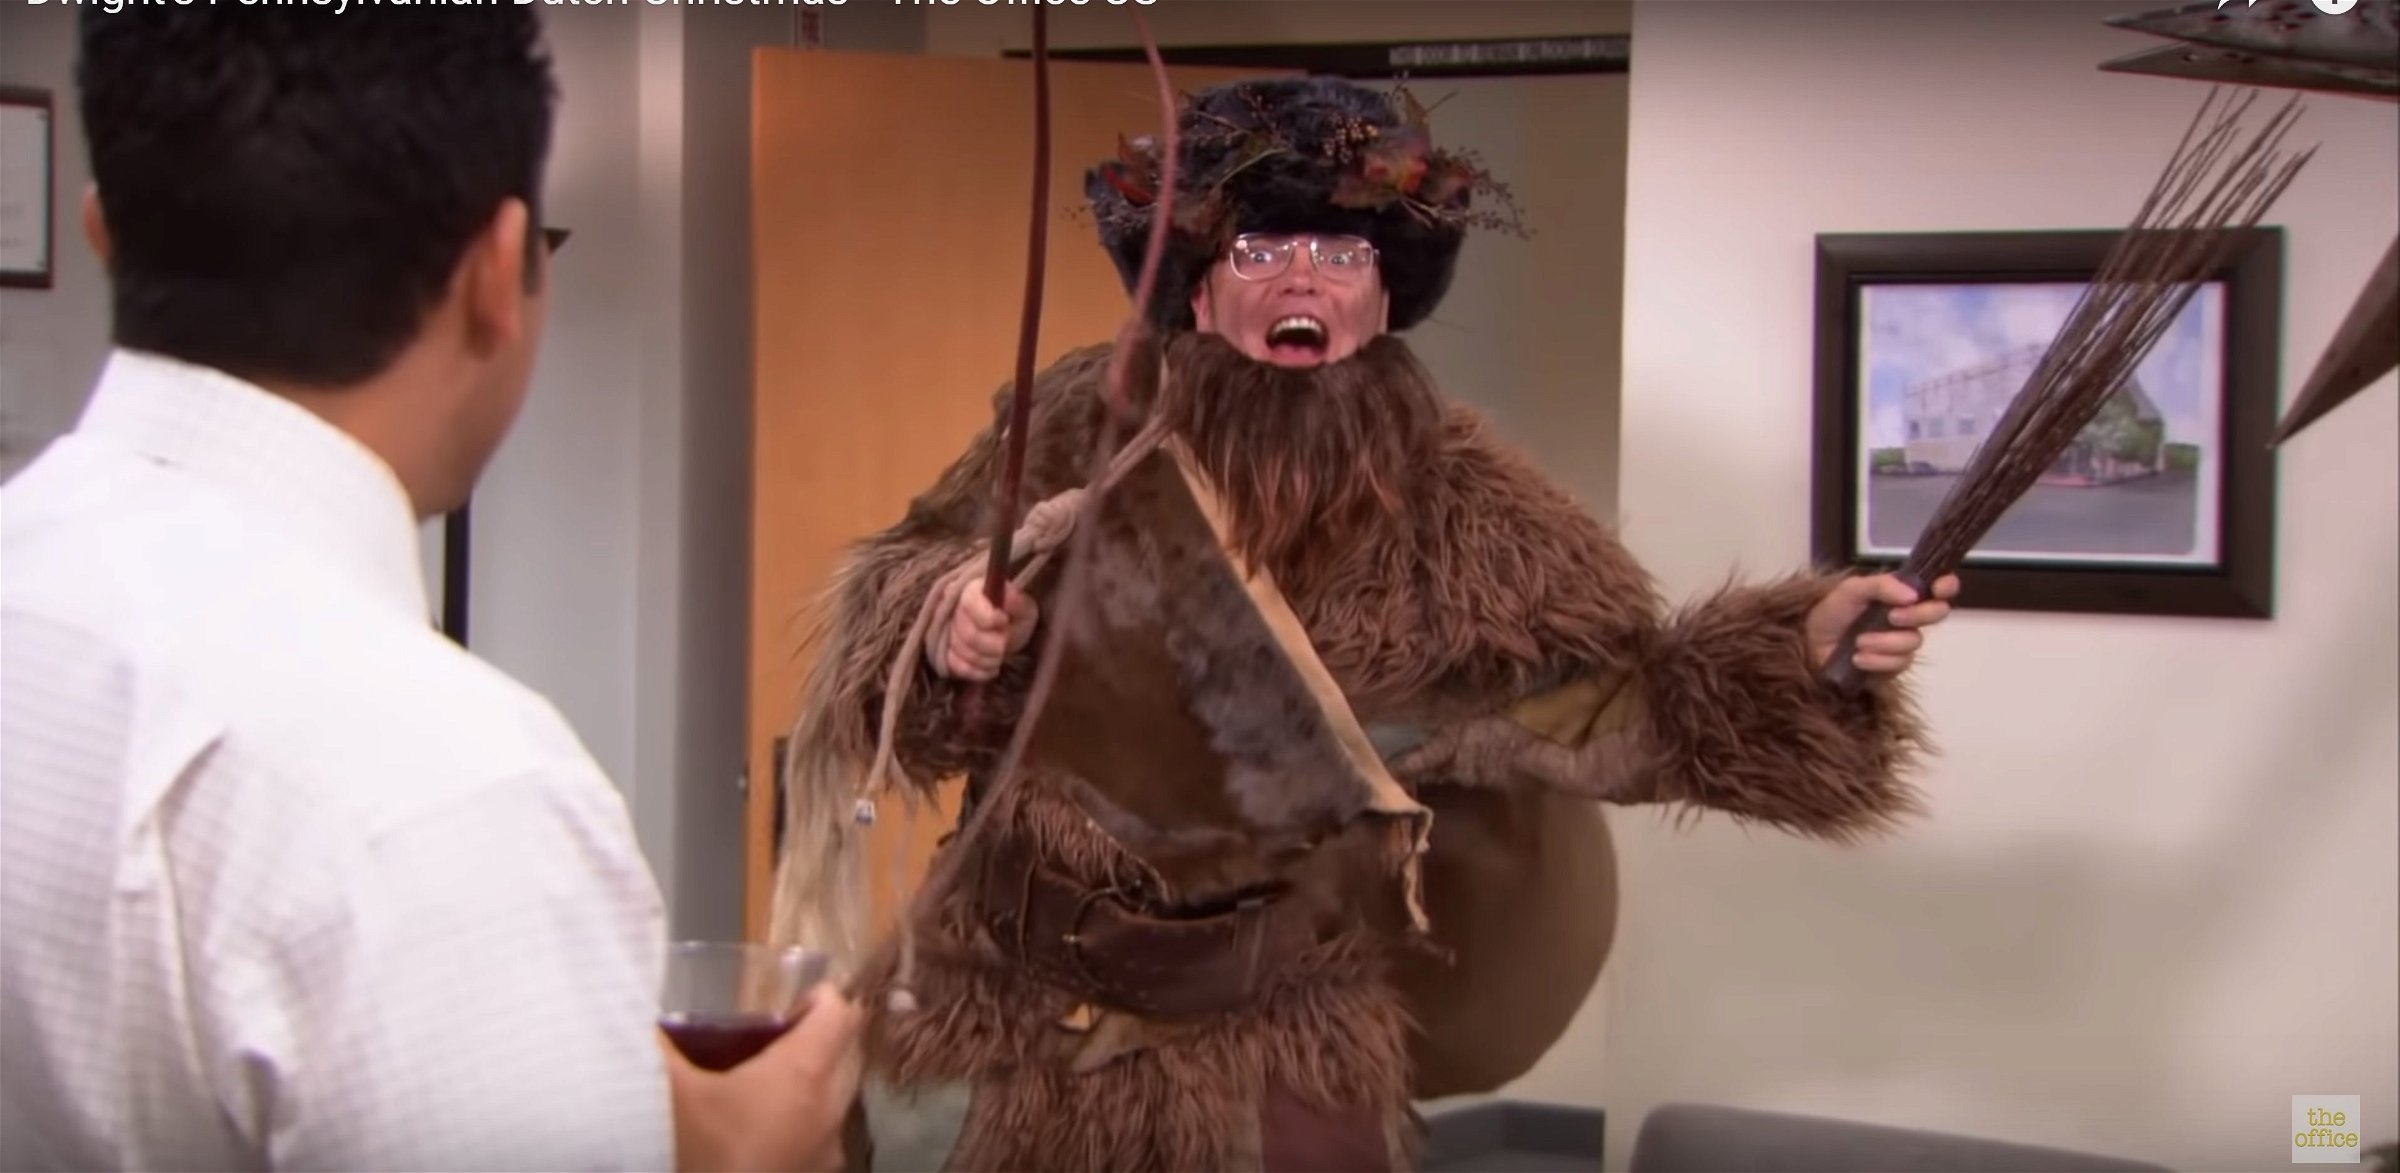 Dwight Schrute, played by Rainn Wilson, dressed as the Belsnickel in the hit television show The Office (YouTube screenshot/ The Office US)